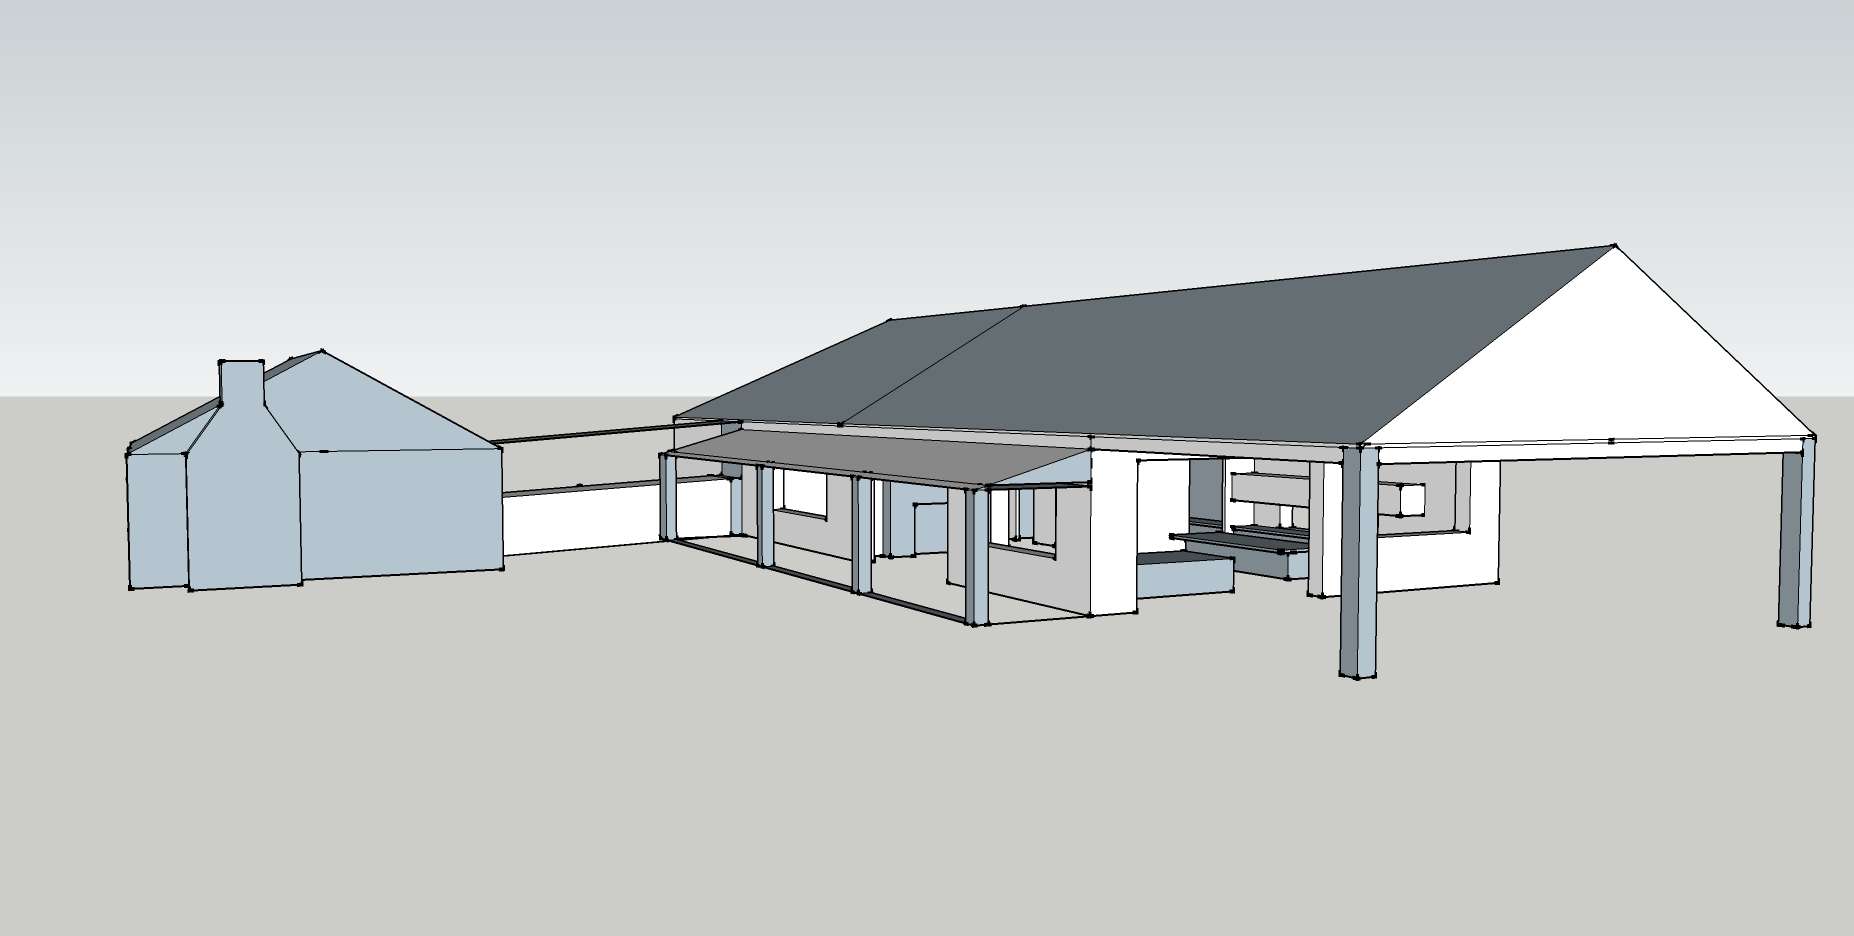 Owner Build in Mt Compass, SA - Step 1: Design and Plans